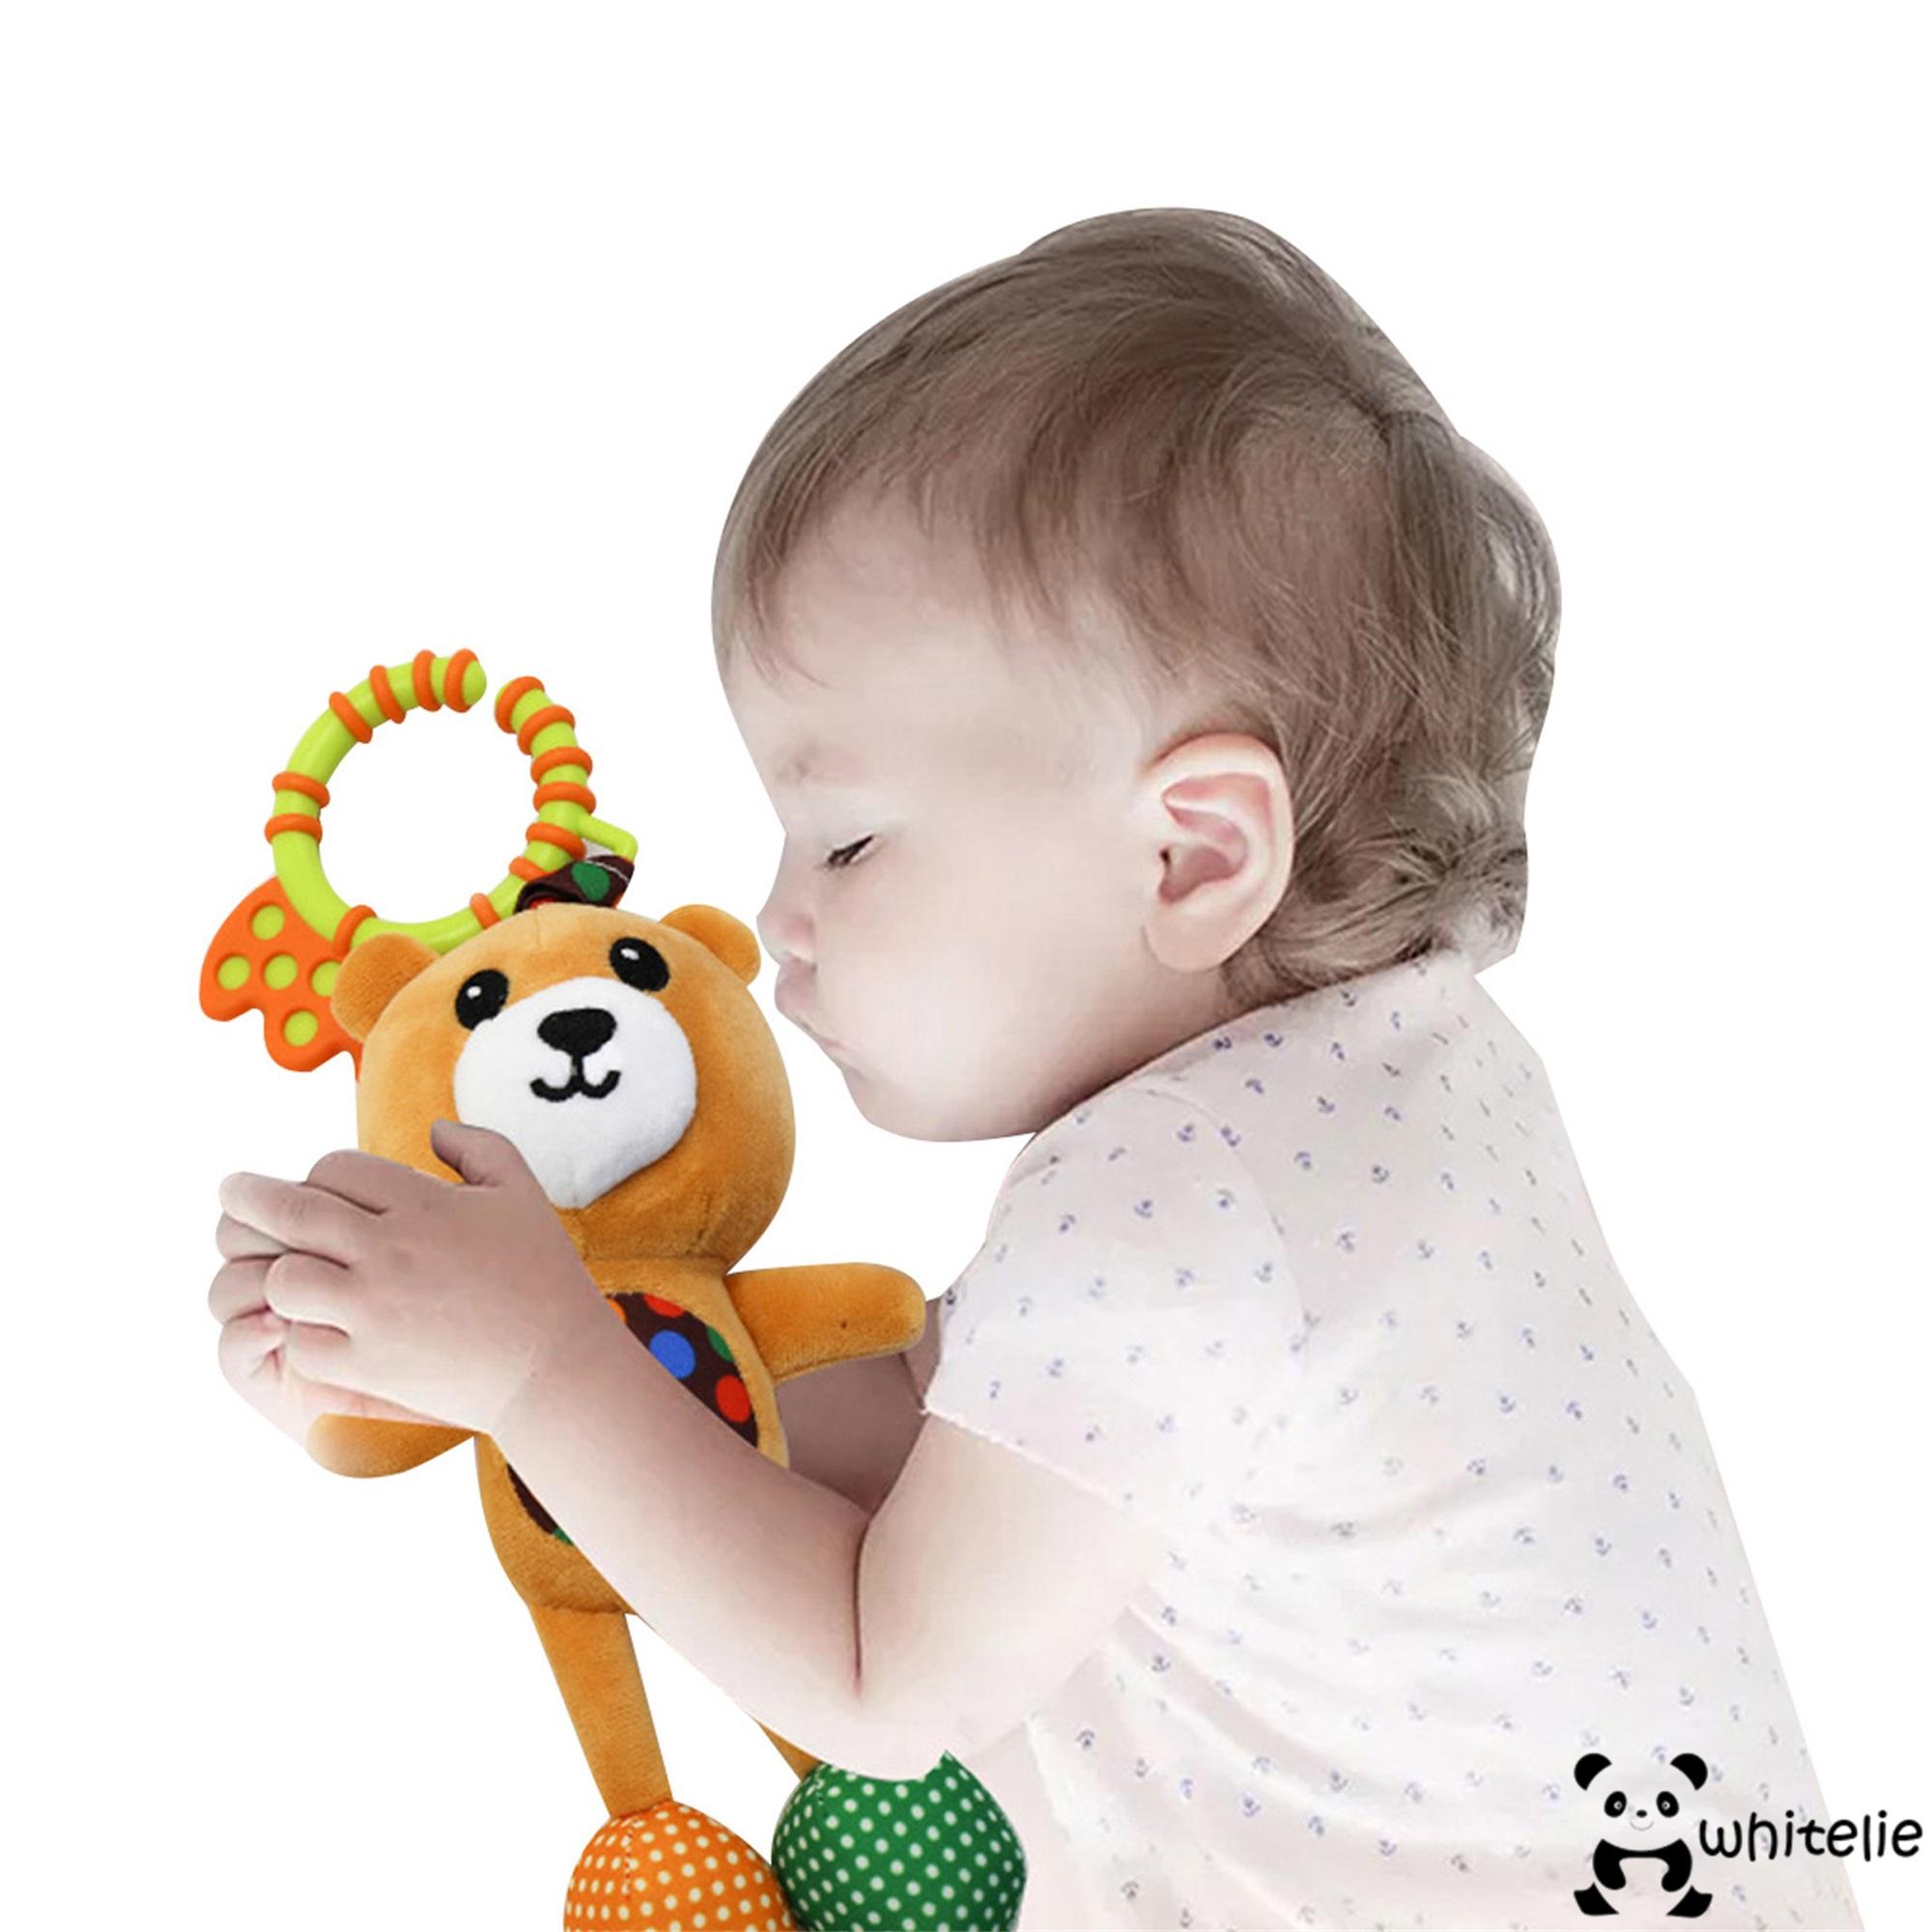 We-Baby Hanging Toys Stuffed Animal with C-Clip Ring Activity Development Toy for Crib Stroller Carseat Decoration